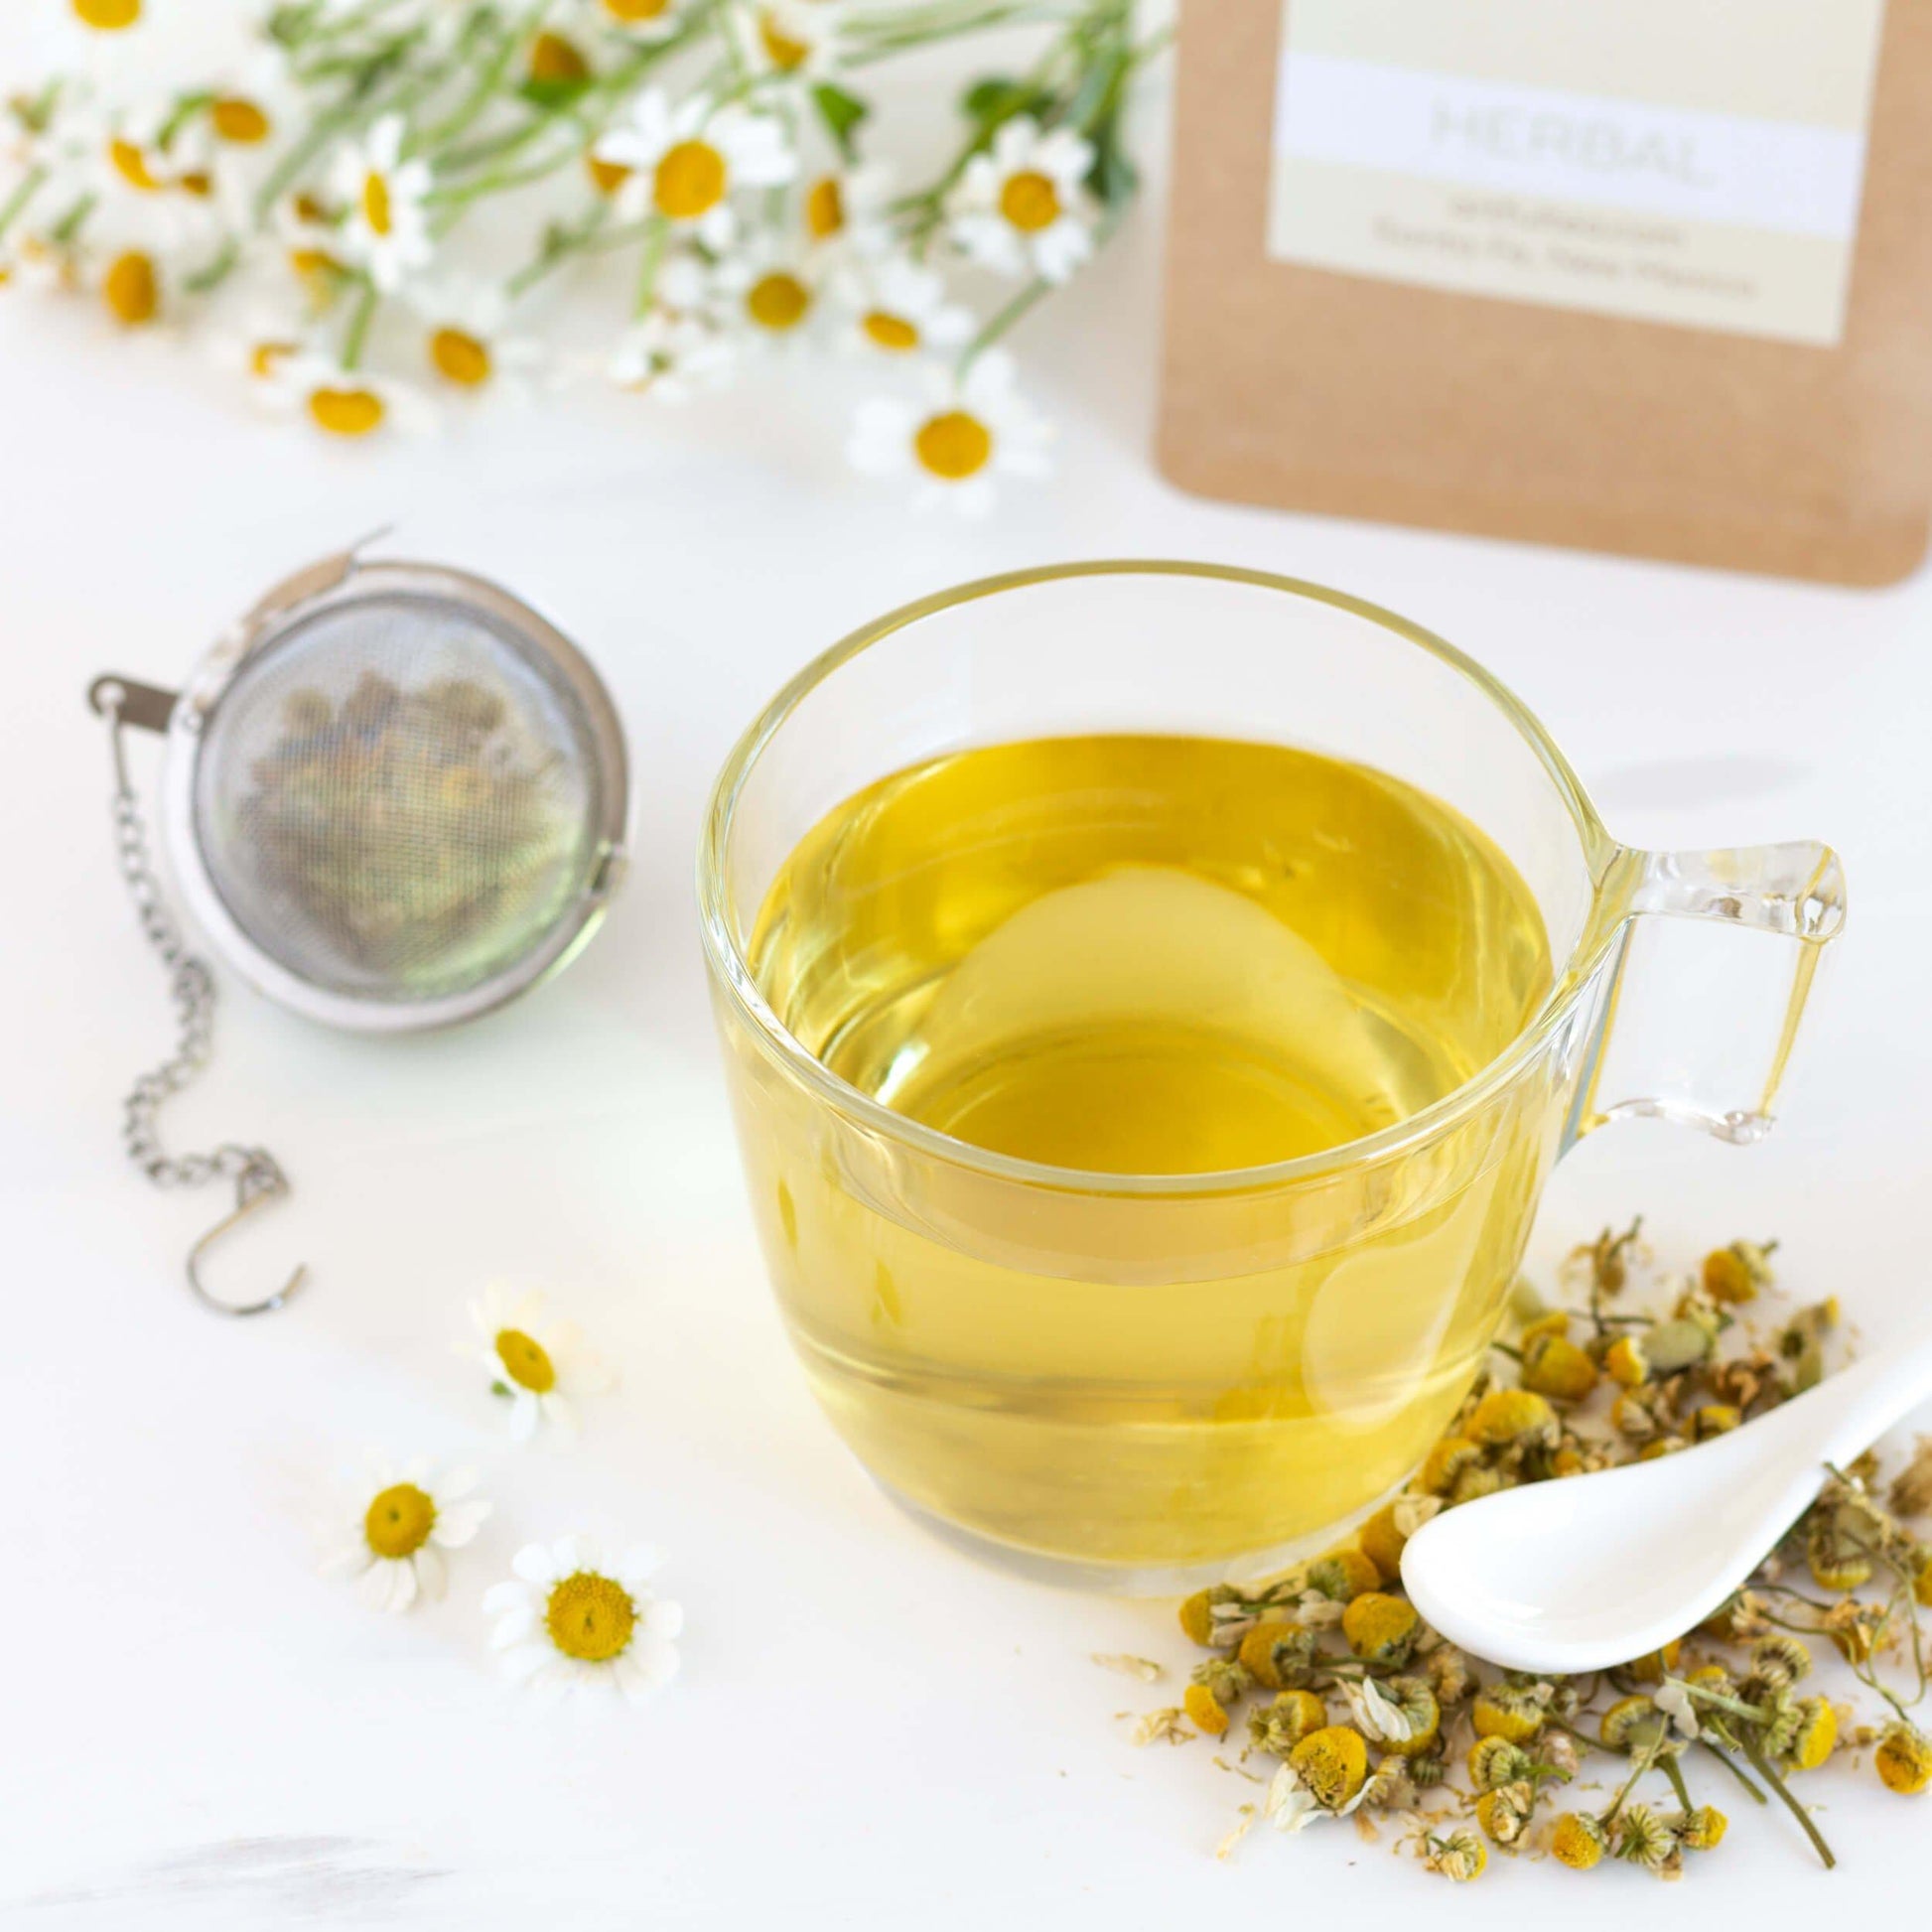 Egyptian Chamomile Organic Herbal Tea shown as brewed tea in a glass mug with a mesh teaball, loose chamomile flowers, and a white porcelain spoon